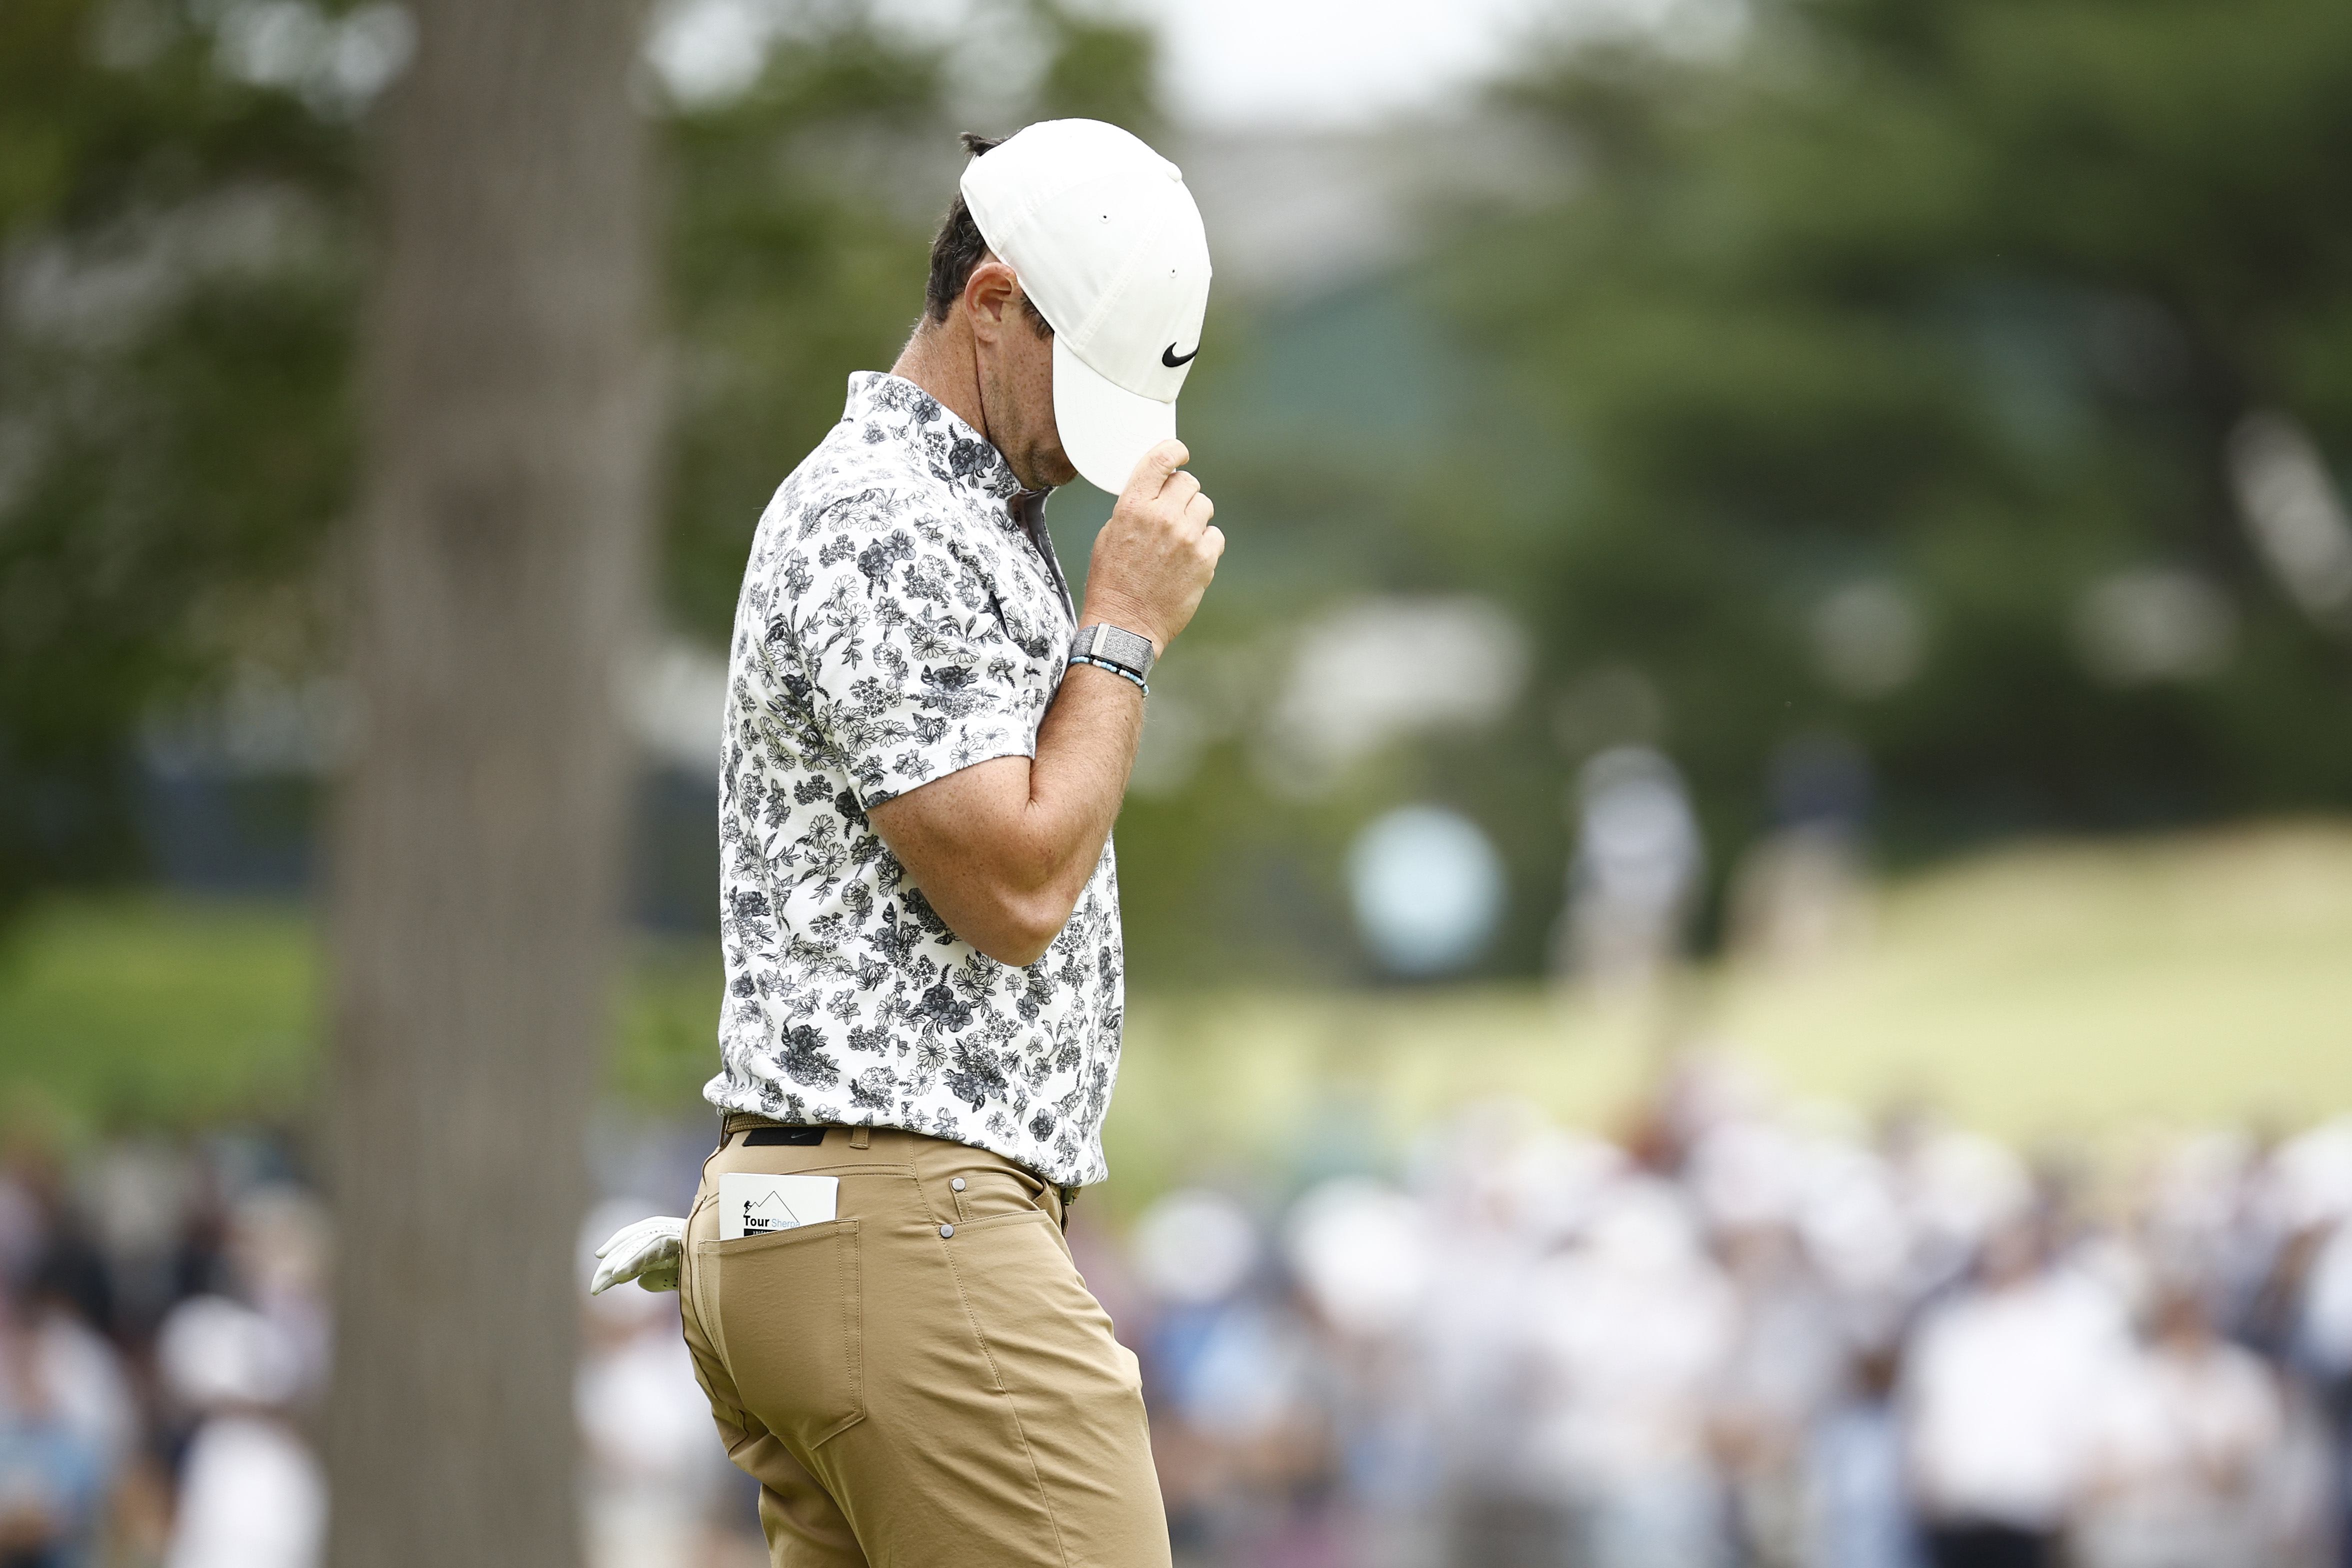 Amazing Amateur Teen Threesome - Rory McIlroy shot 3-under 67 yet still lost his cool, and other thoughts on  the first round of the US Open - The Boston Globe